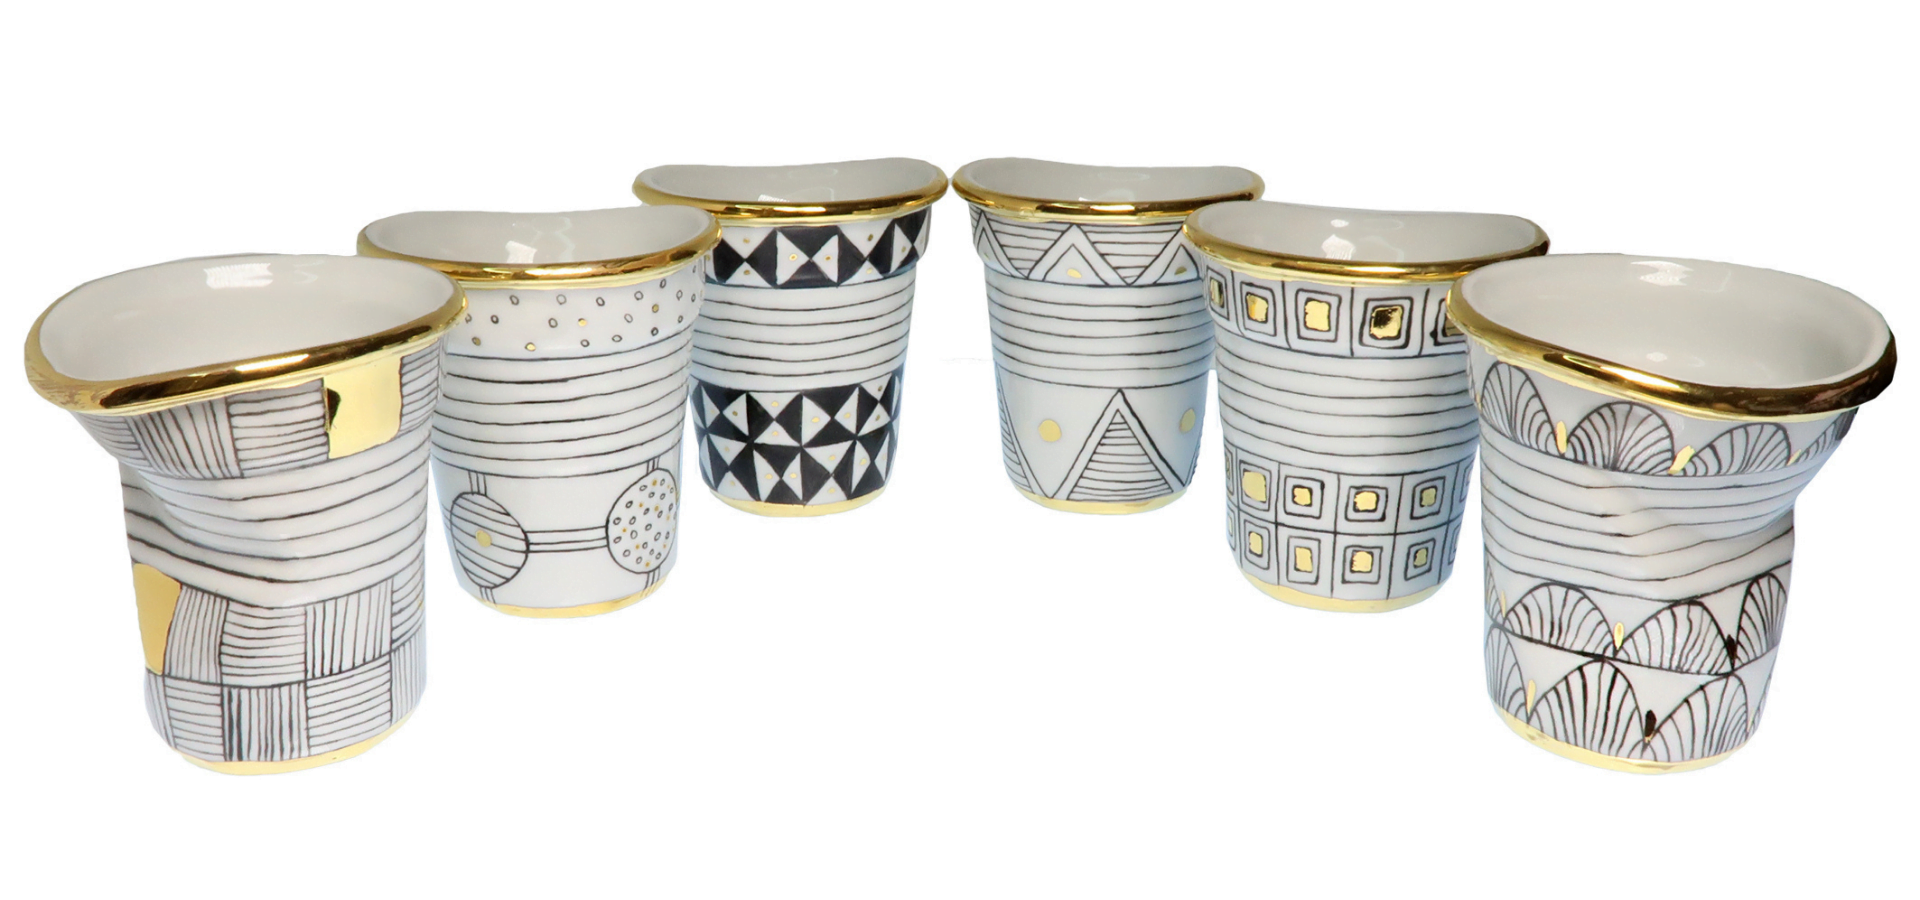 hand painted porcelain coffee cups - gold plated espresso cups